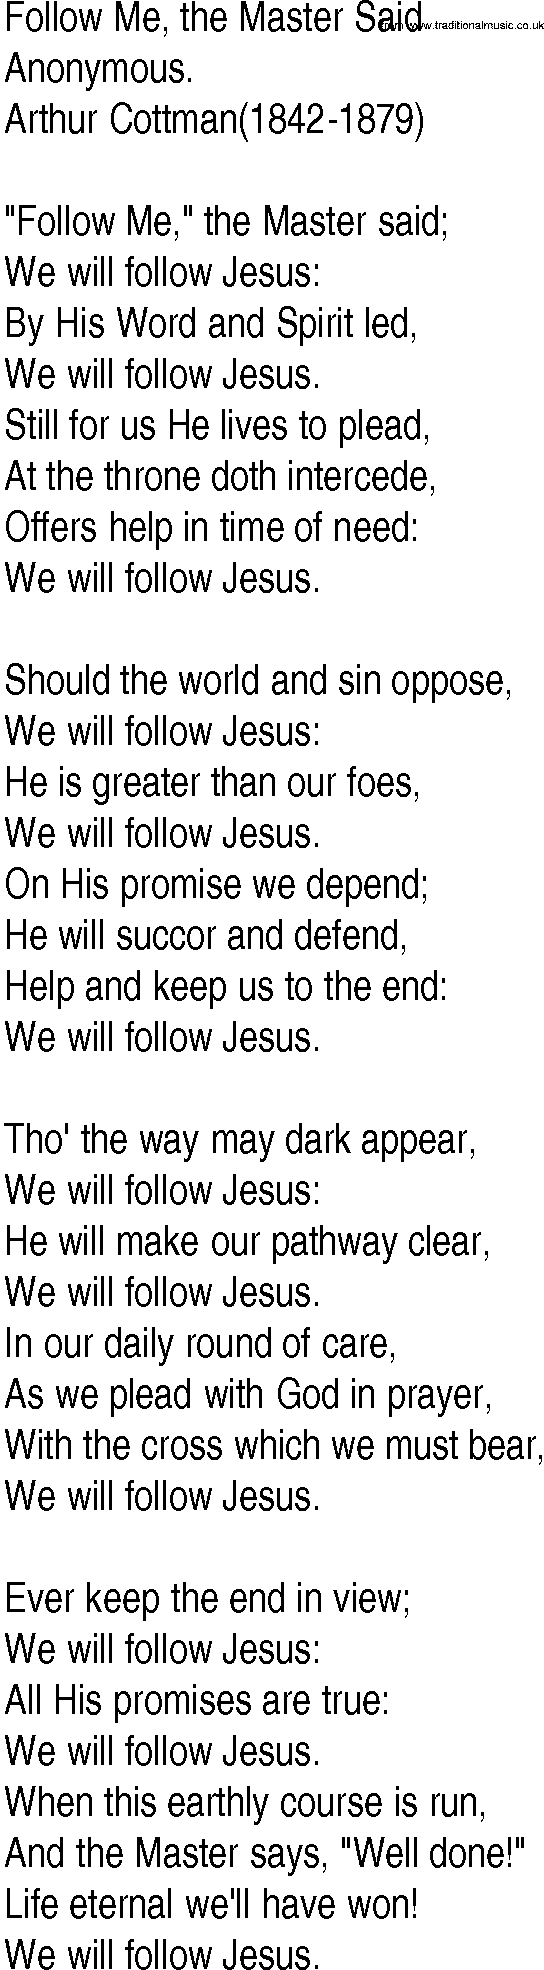 Hymn and Gospel Song: Follow Me, the Master Said by Anonymous lyrics